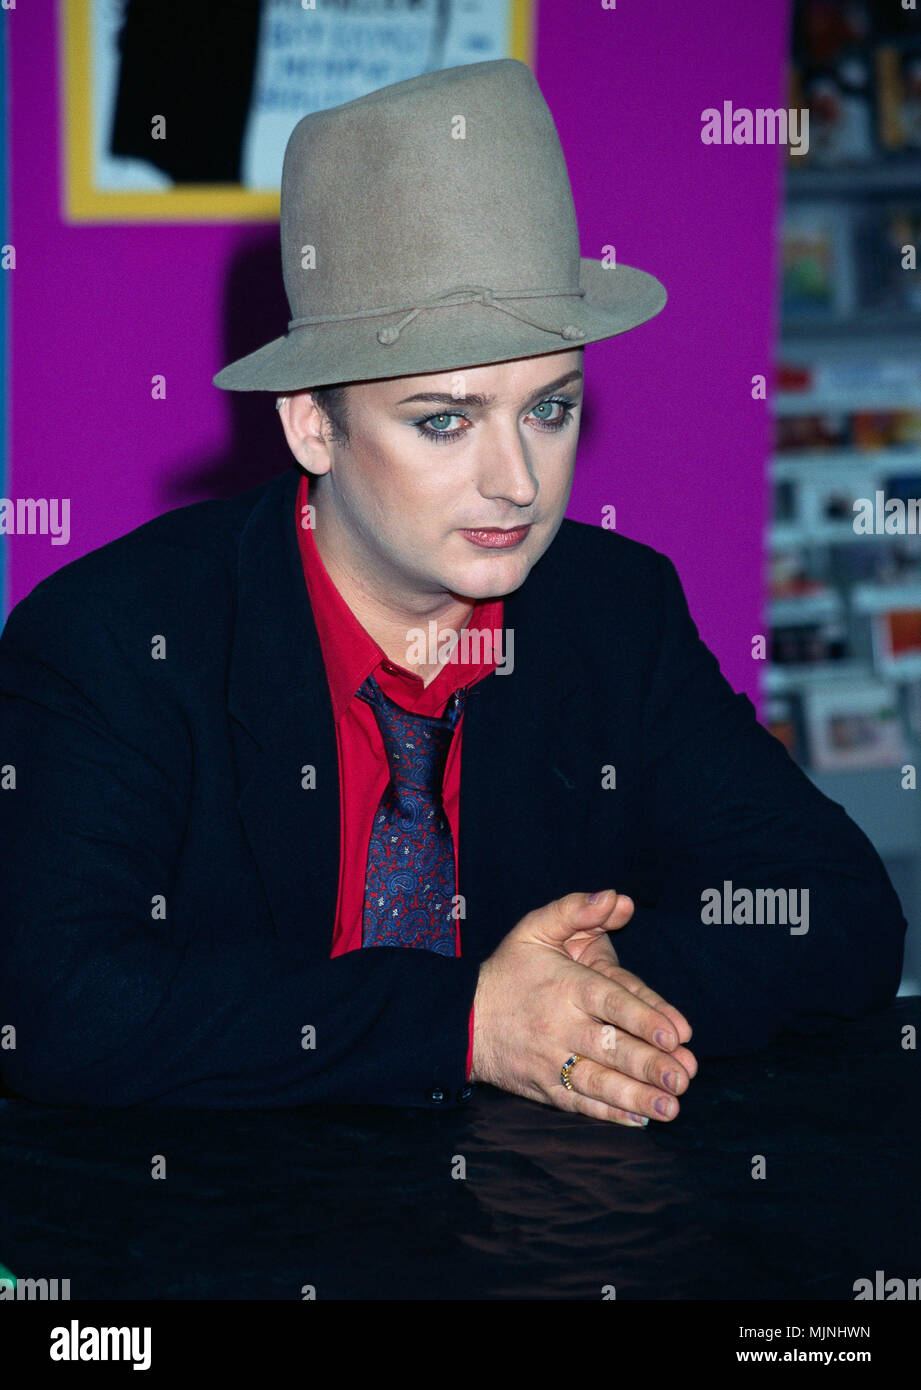 1995 --- Boy George --- ' Tsuni / - 'Boy George Boy George  adult, Boy George, British, Caucasian ethnicity, celebrities, clothing, English, European, hands together, hat, head and shoulders, headgear, male, men, music, one, one person, outfit, people, portrait, prominent persons, studio shot, suits, Western European culture, Western European descent, headshot, -- -- #Celebrity #Hollywood #RedCarpet #Actor #Actress #famousCelebrity #HollywoodEvent #TsuniUSA #CelebrityPhotography Stock Photo